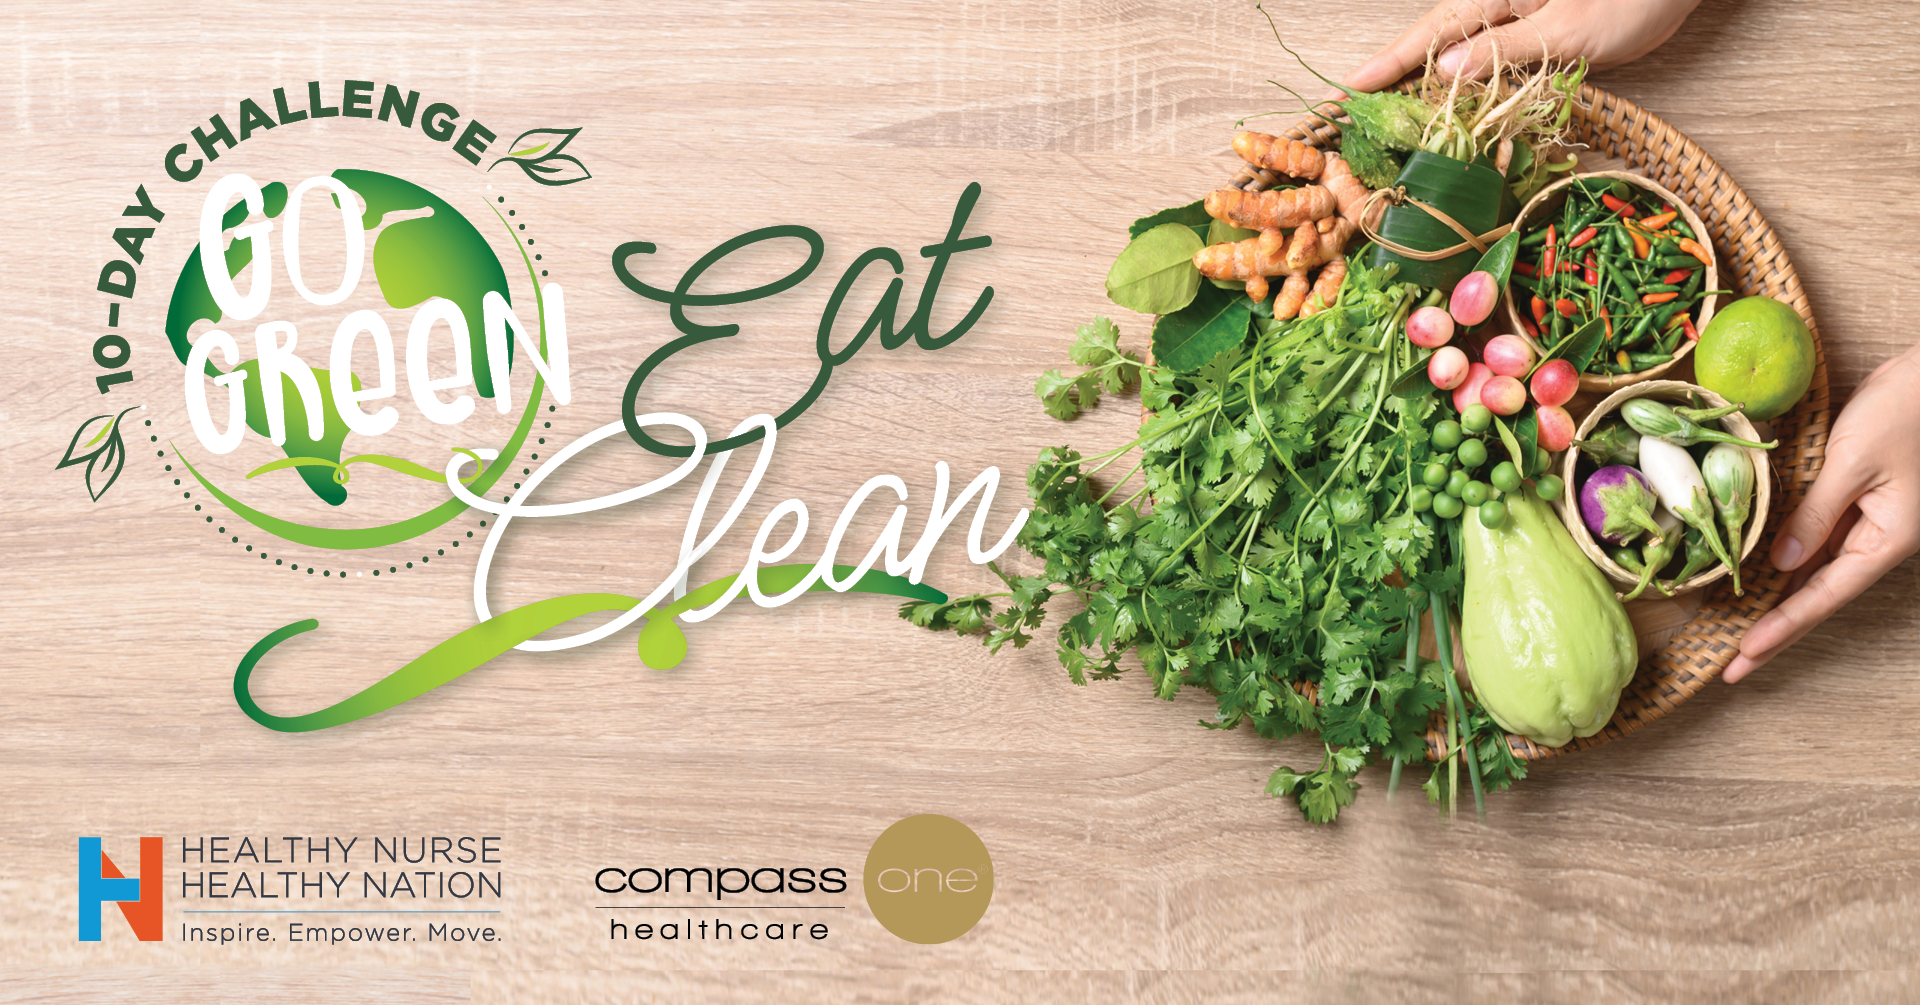 Put More Plants On Your Plate - Eat Clean, Go Green challenge, powered by Compass One Healthcare - Day 1 Tip 4266